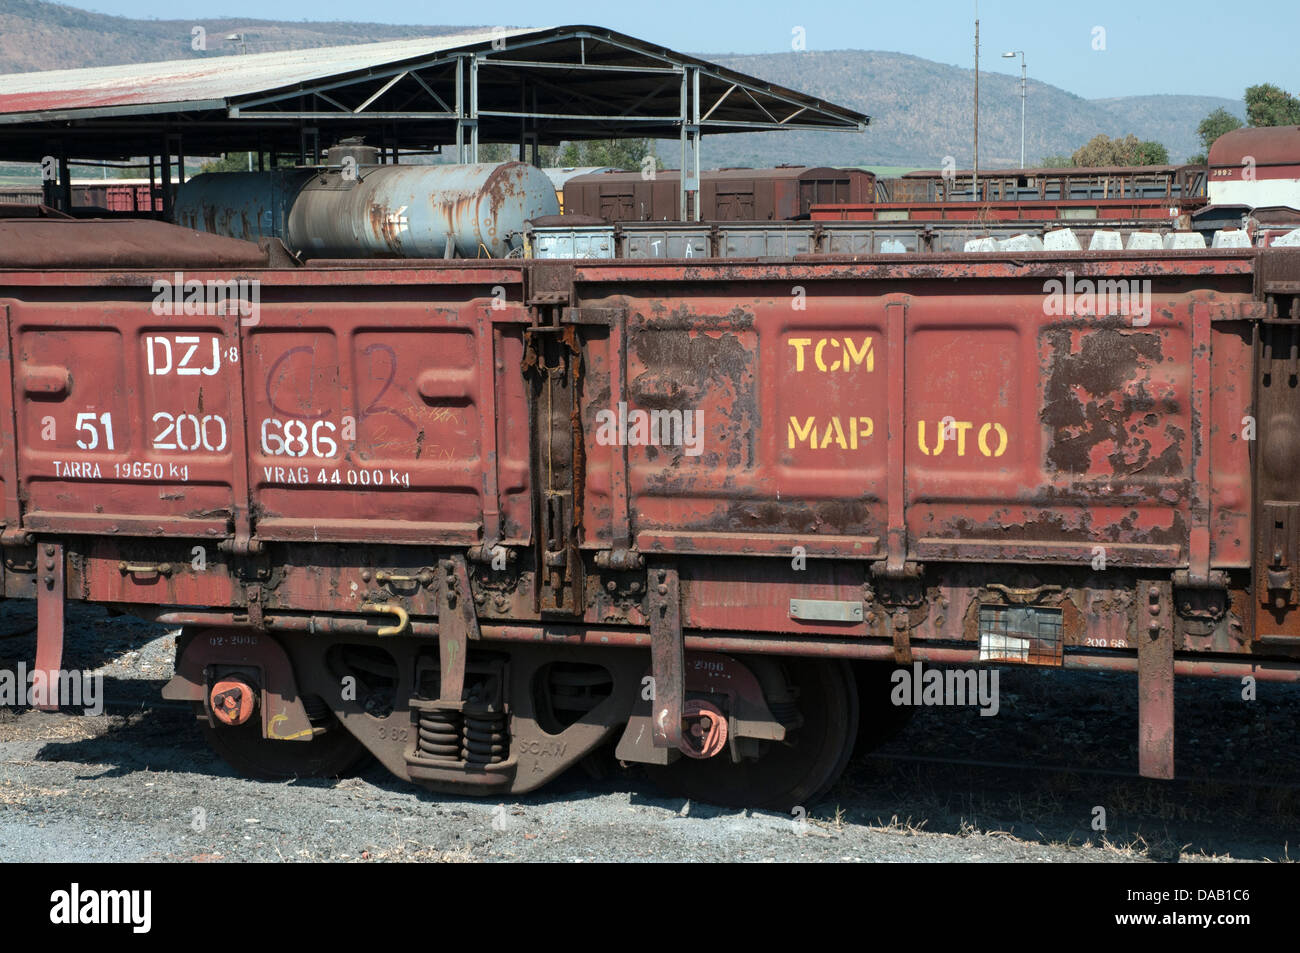 rolling stock in komatipoort goods yard sidings south africa Stock Photo